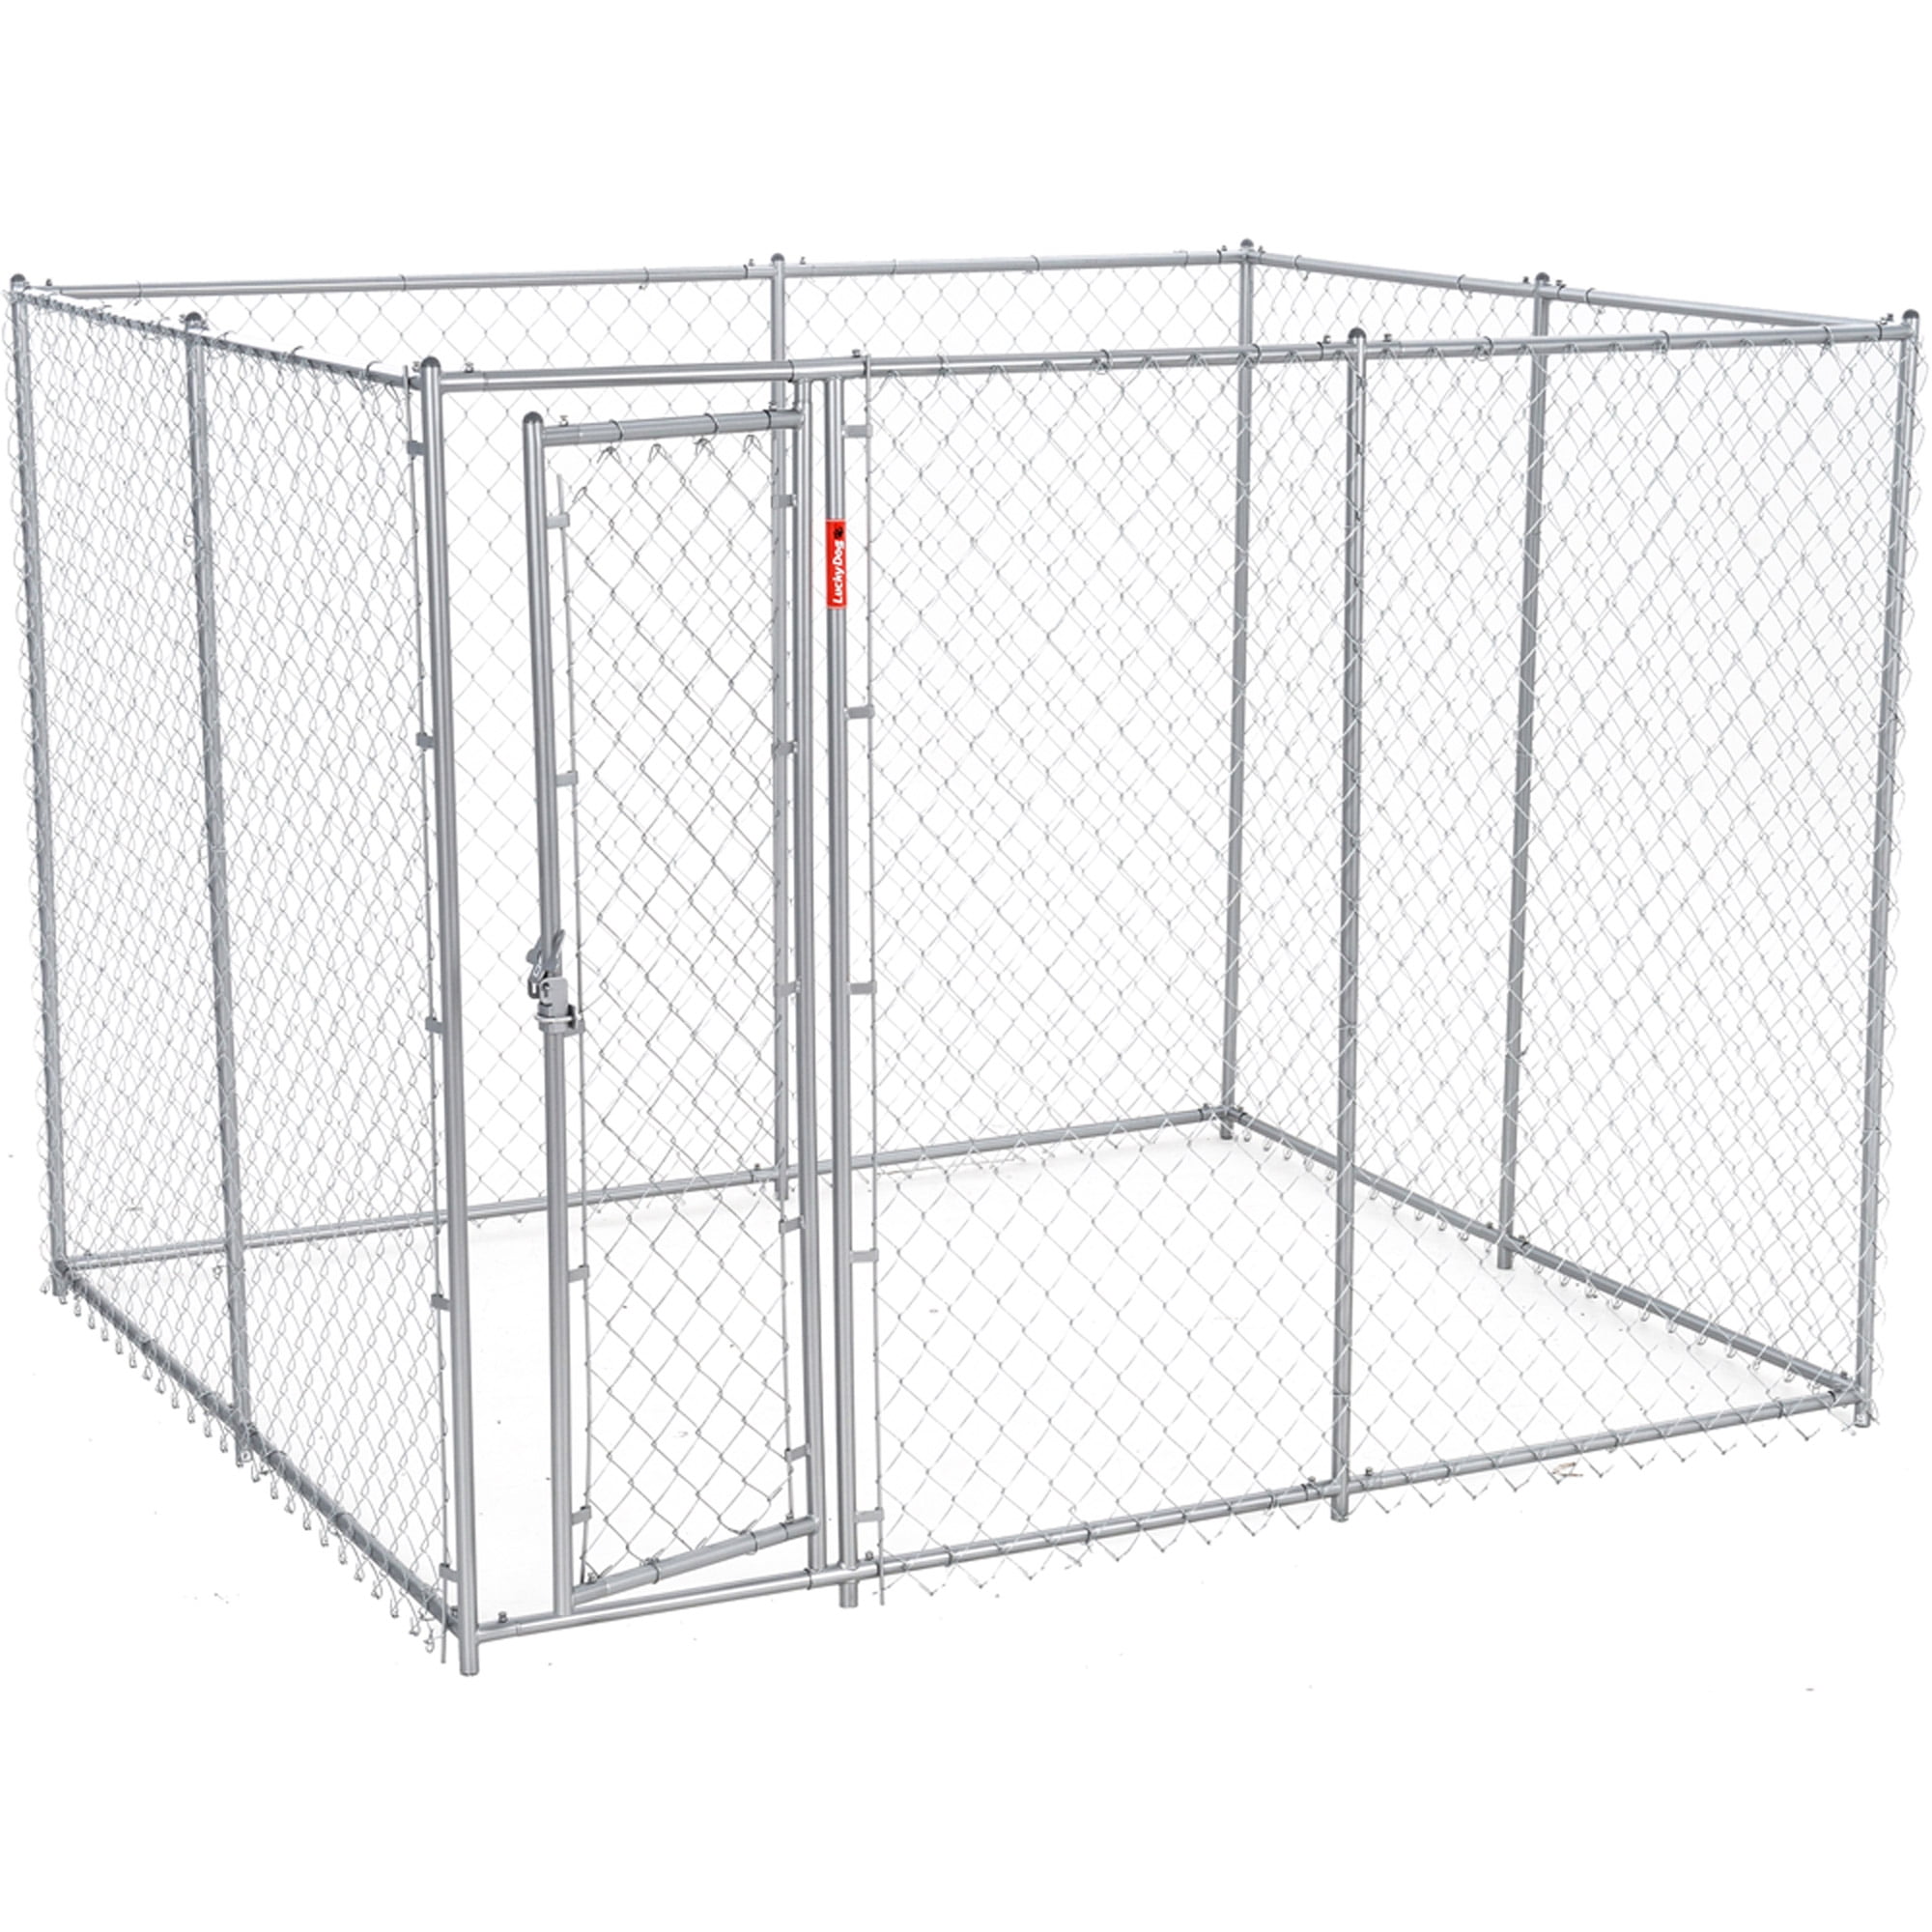 6 foot kennel panels